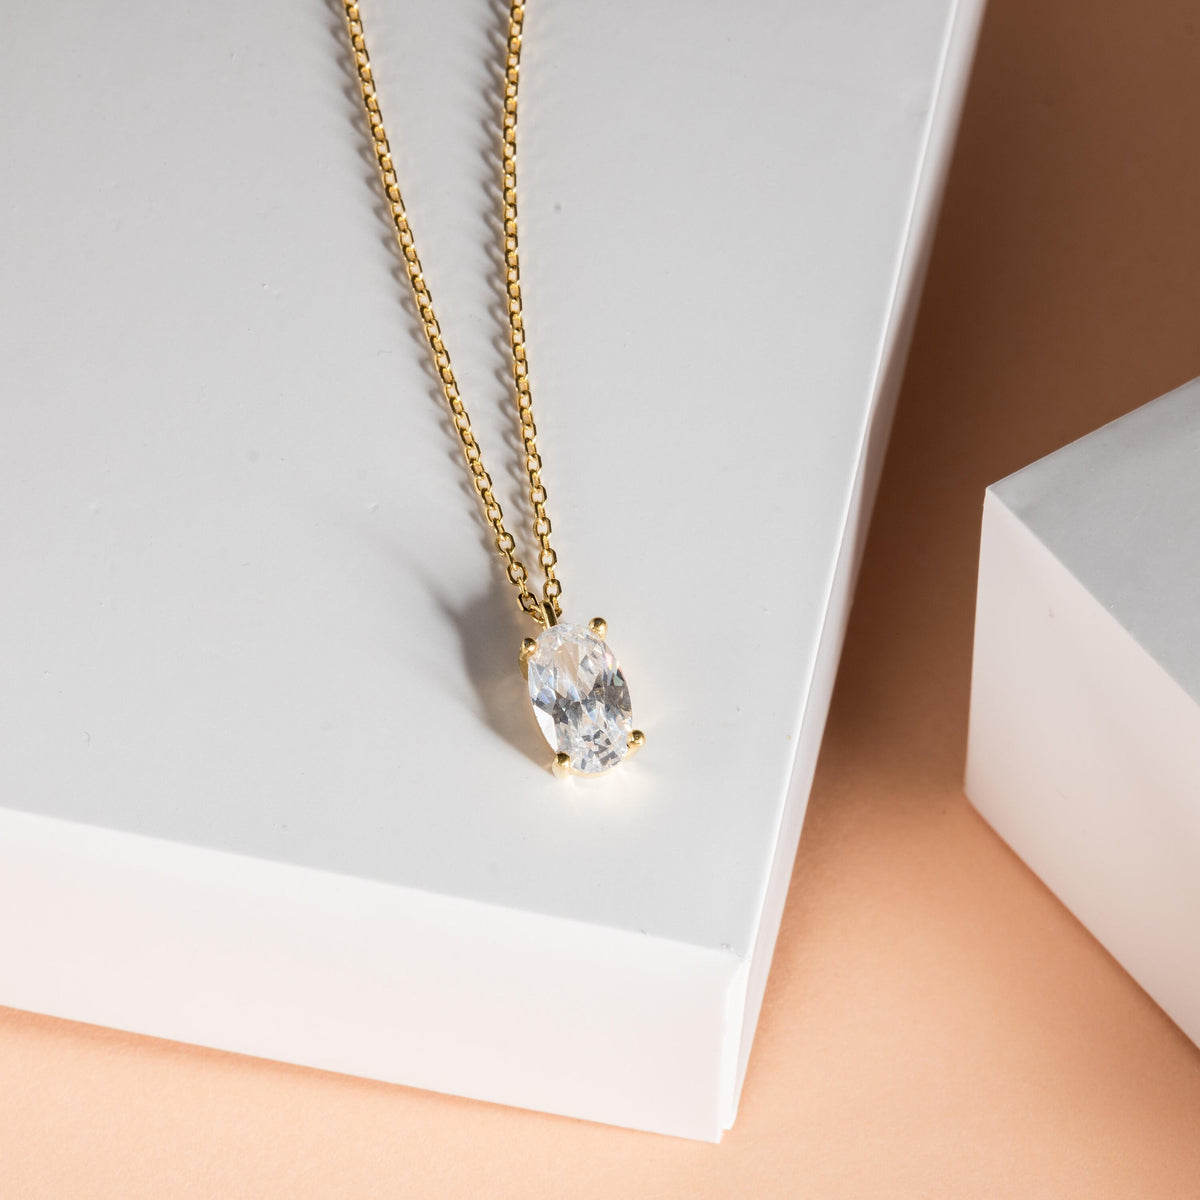 Oval Solitaire Pendant Necklace